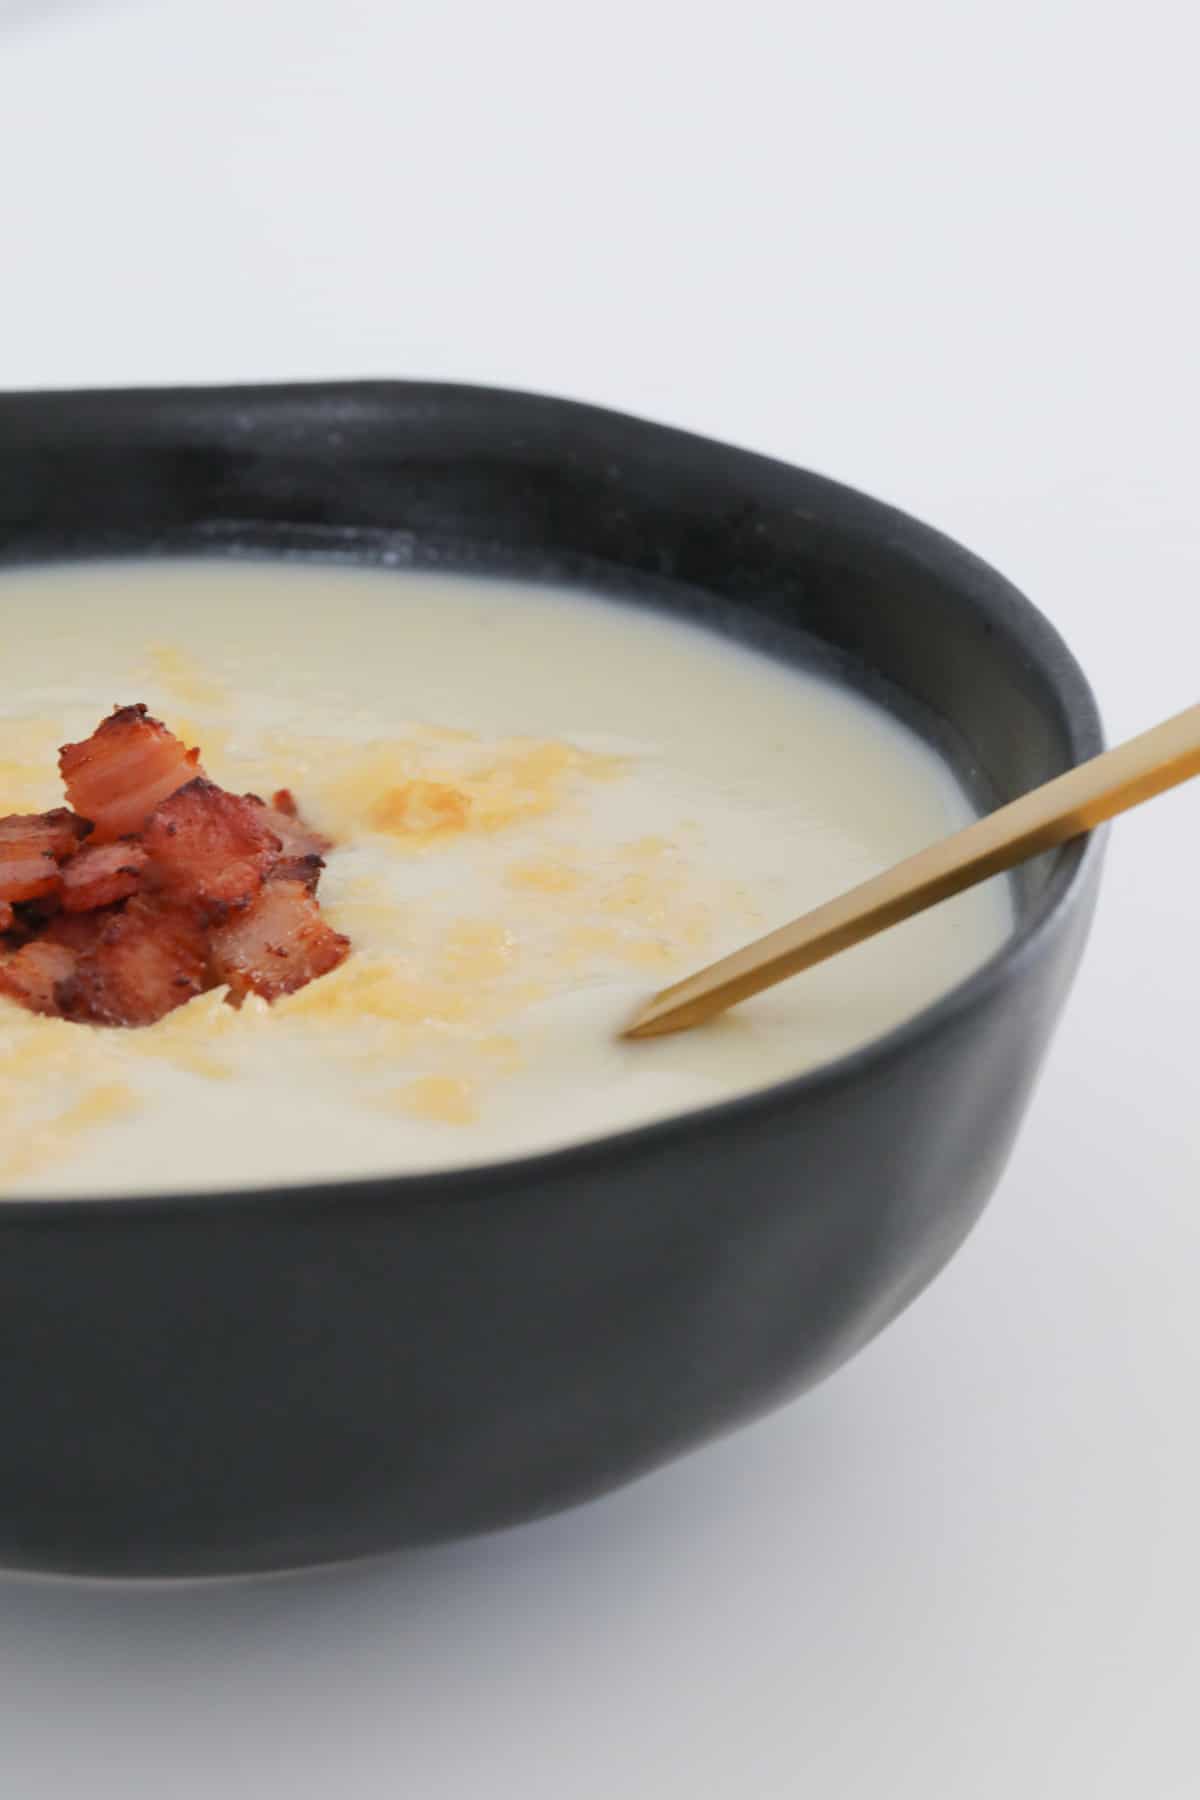 A close up image of a golden spoon resting in a bowl of white soup with bacon and parmesan cheese garnish